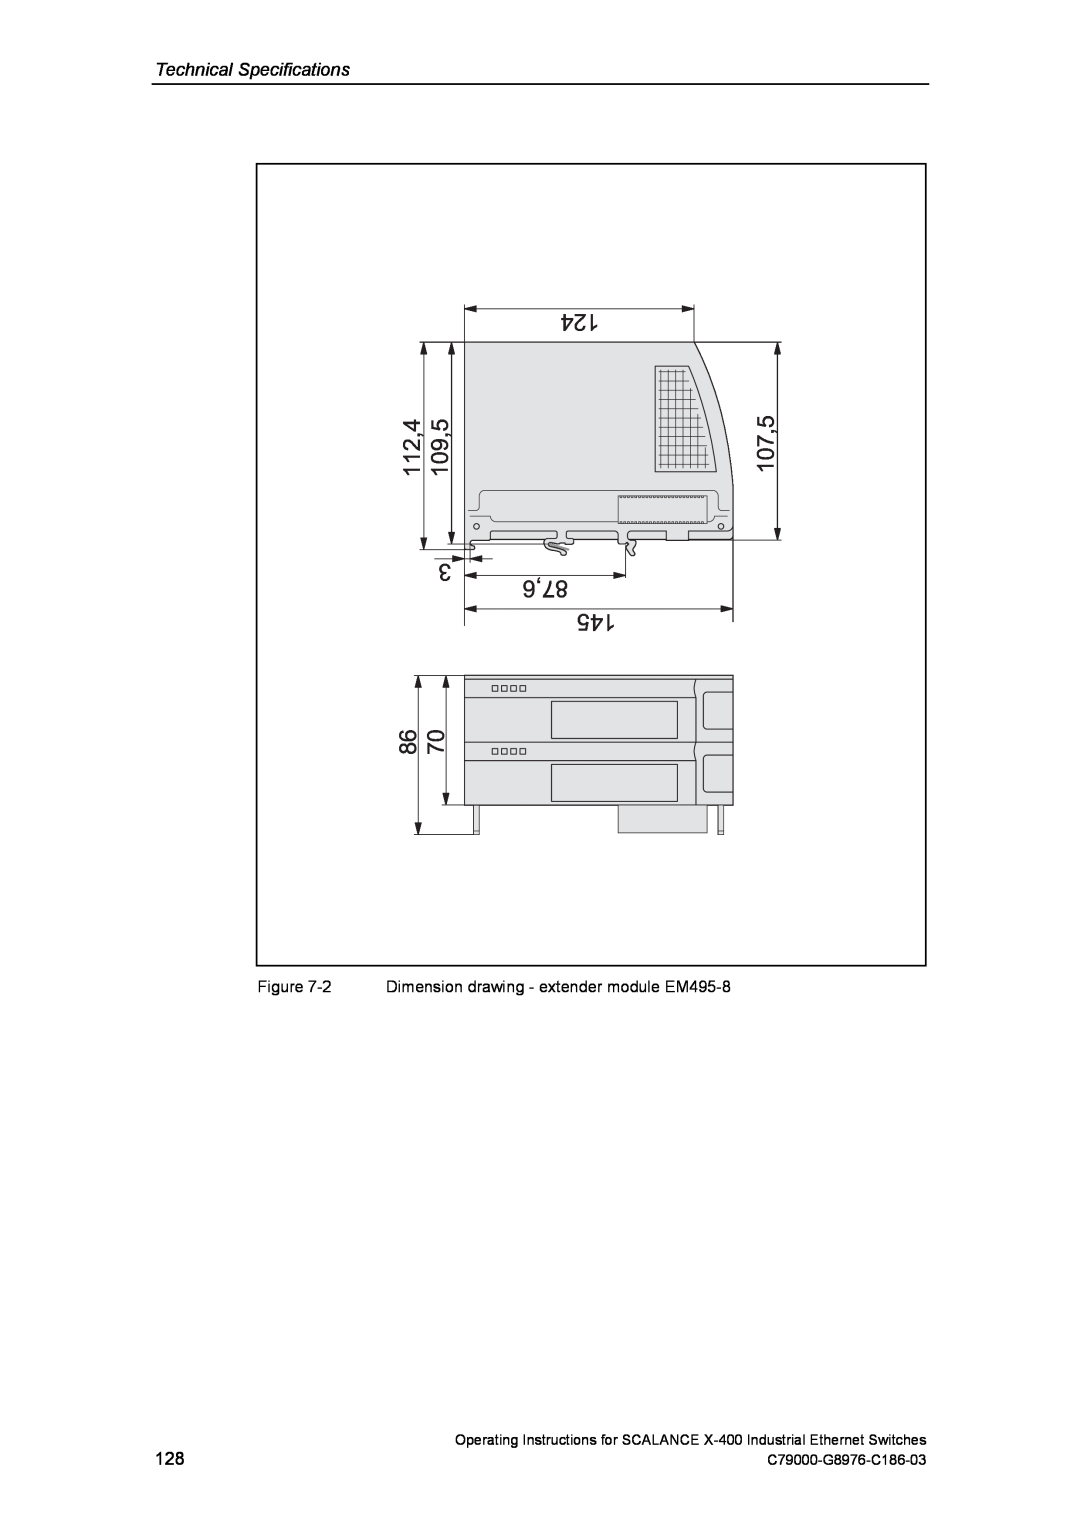 Siemens X-400 112,4, 109,5, 107,5, 87,6, Technical Specifications, 2 Dimension drawing - extender module EM495-8 